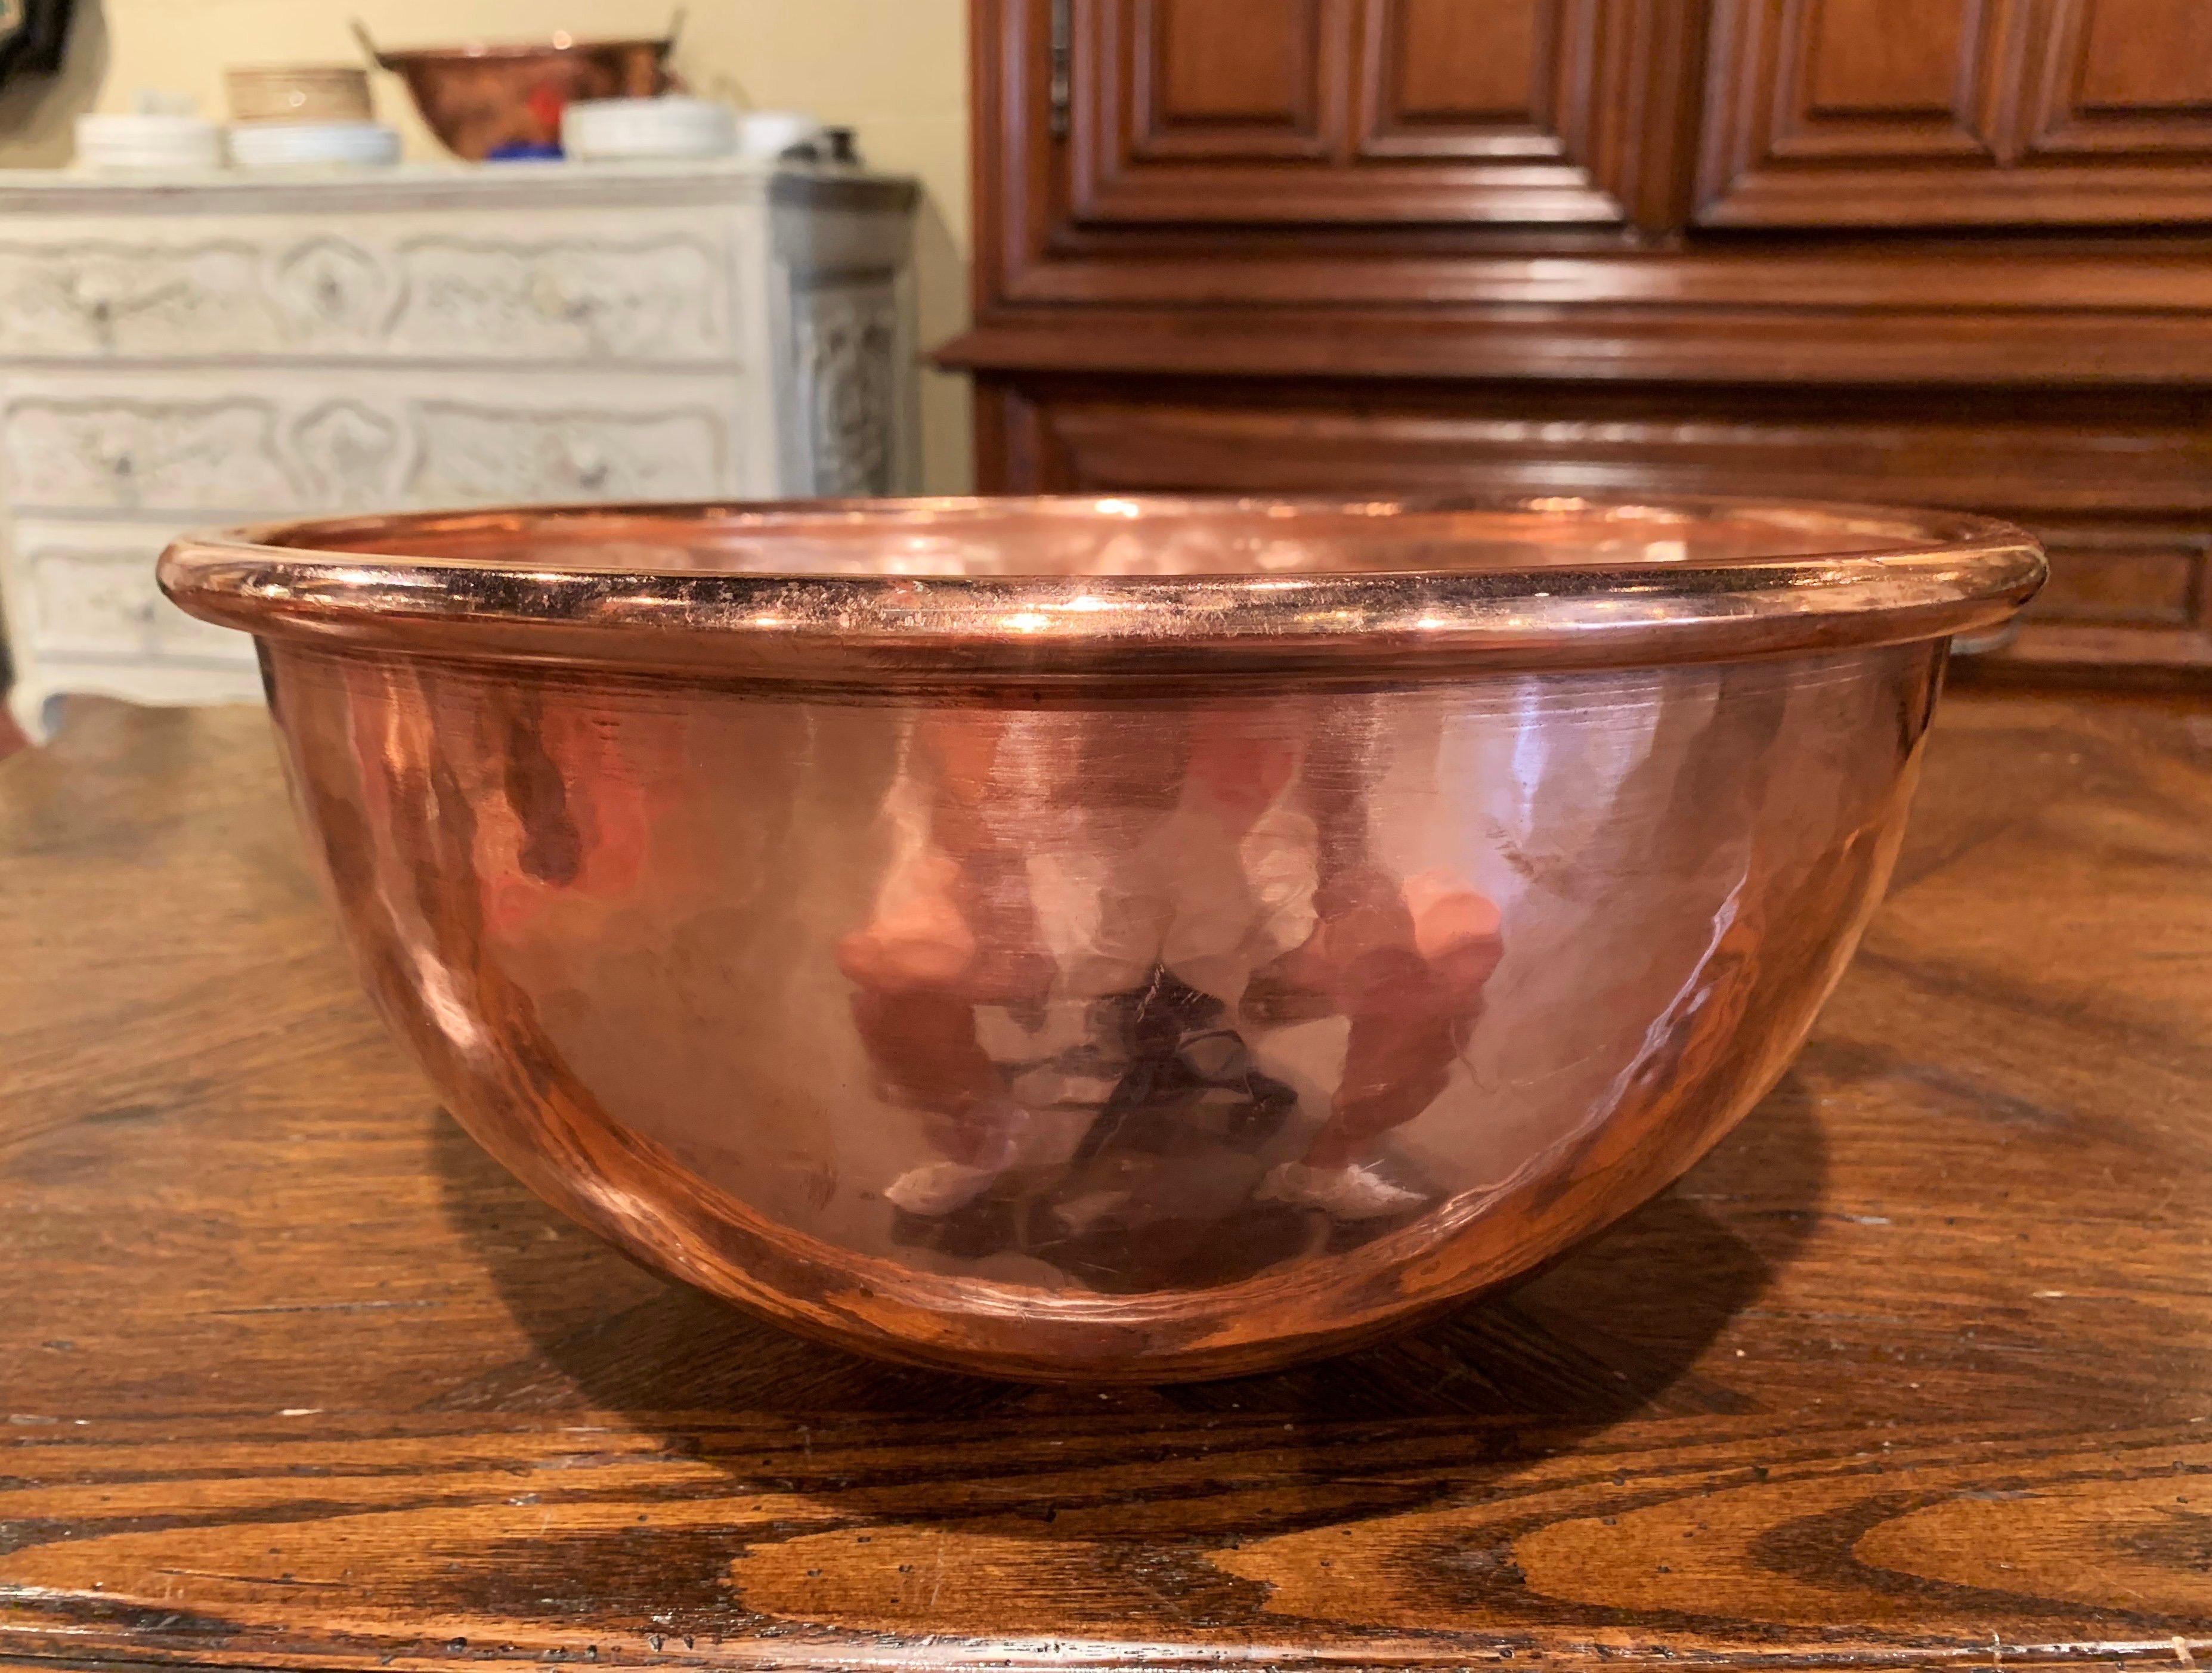 Keep your wine chilled in style with this elegant round bowl, crafted in Northern France circa 1870 and originally used for homemade jelly, the circular copper bowl with rounded rim is decorated with a small round side handle attached with rivets.